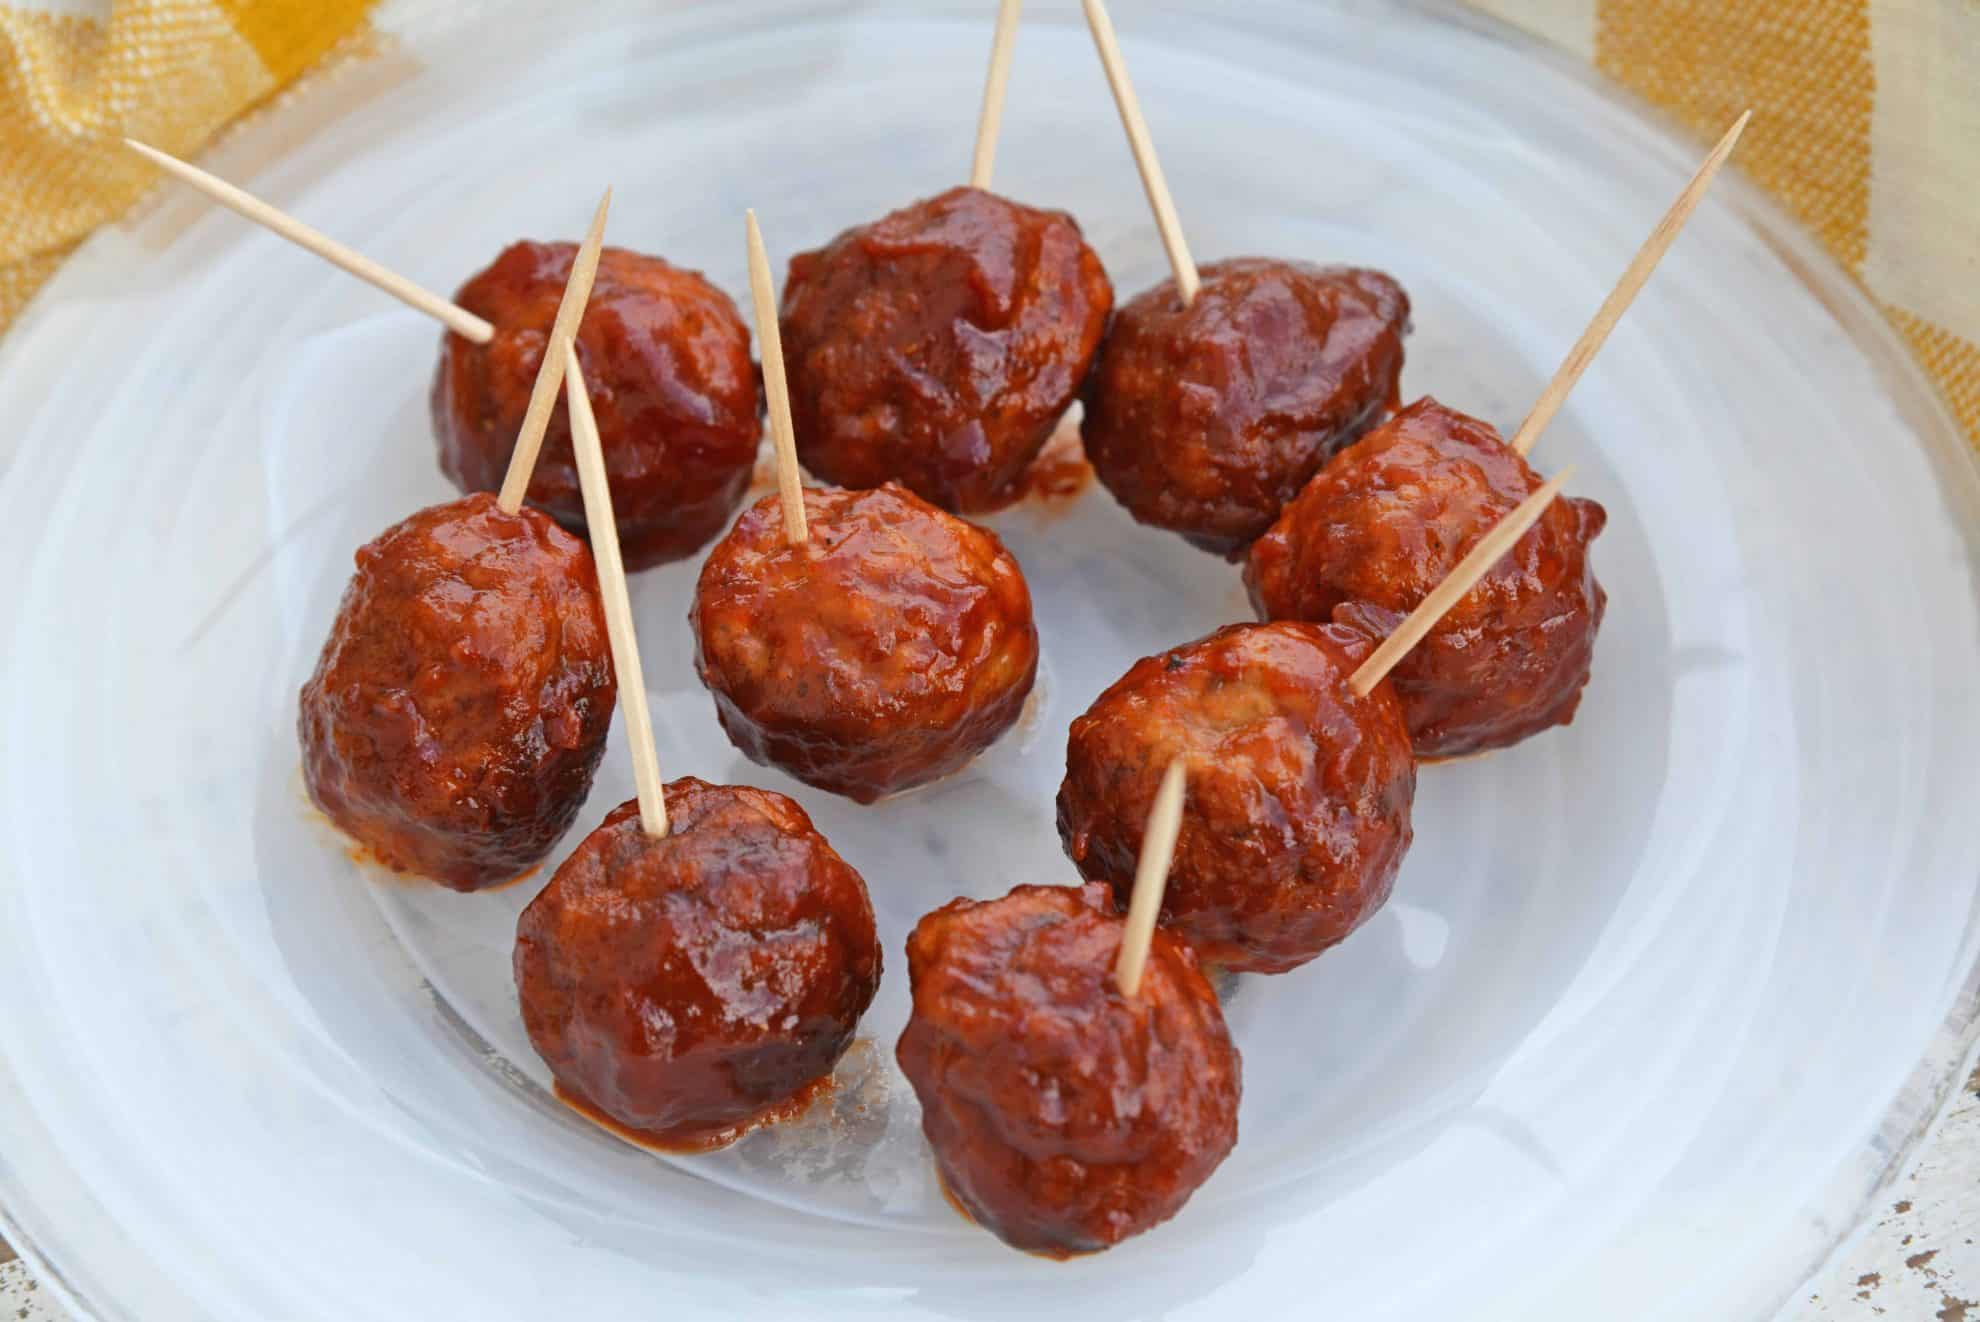 These Cranberry Chili Meatballs, made with only 4 ingredients, will become your go-to cocktail meatballs recipe! The perfect appetizer for any gathering! #partymeatballs #instantpotmeatballs #cocktailmeatballs www.savoryexperiments.com